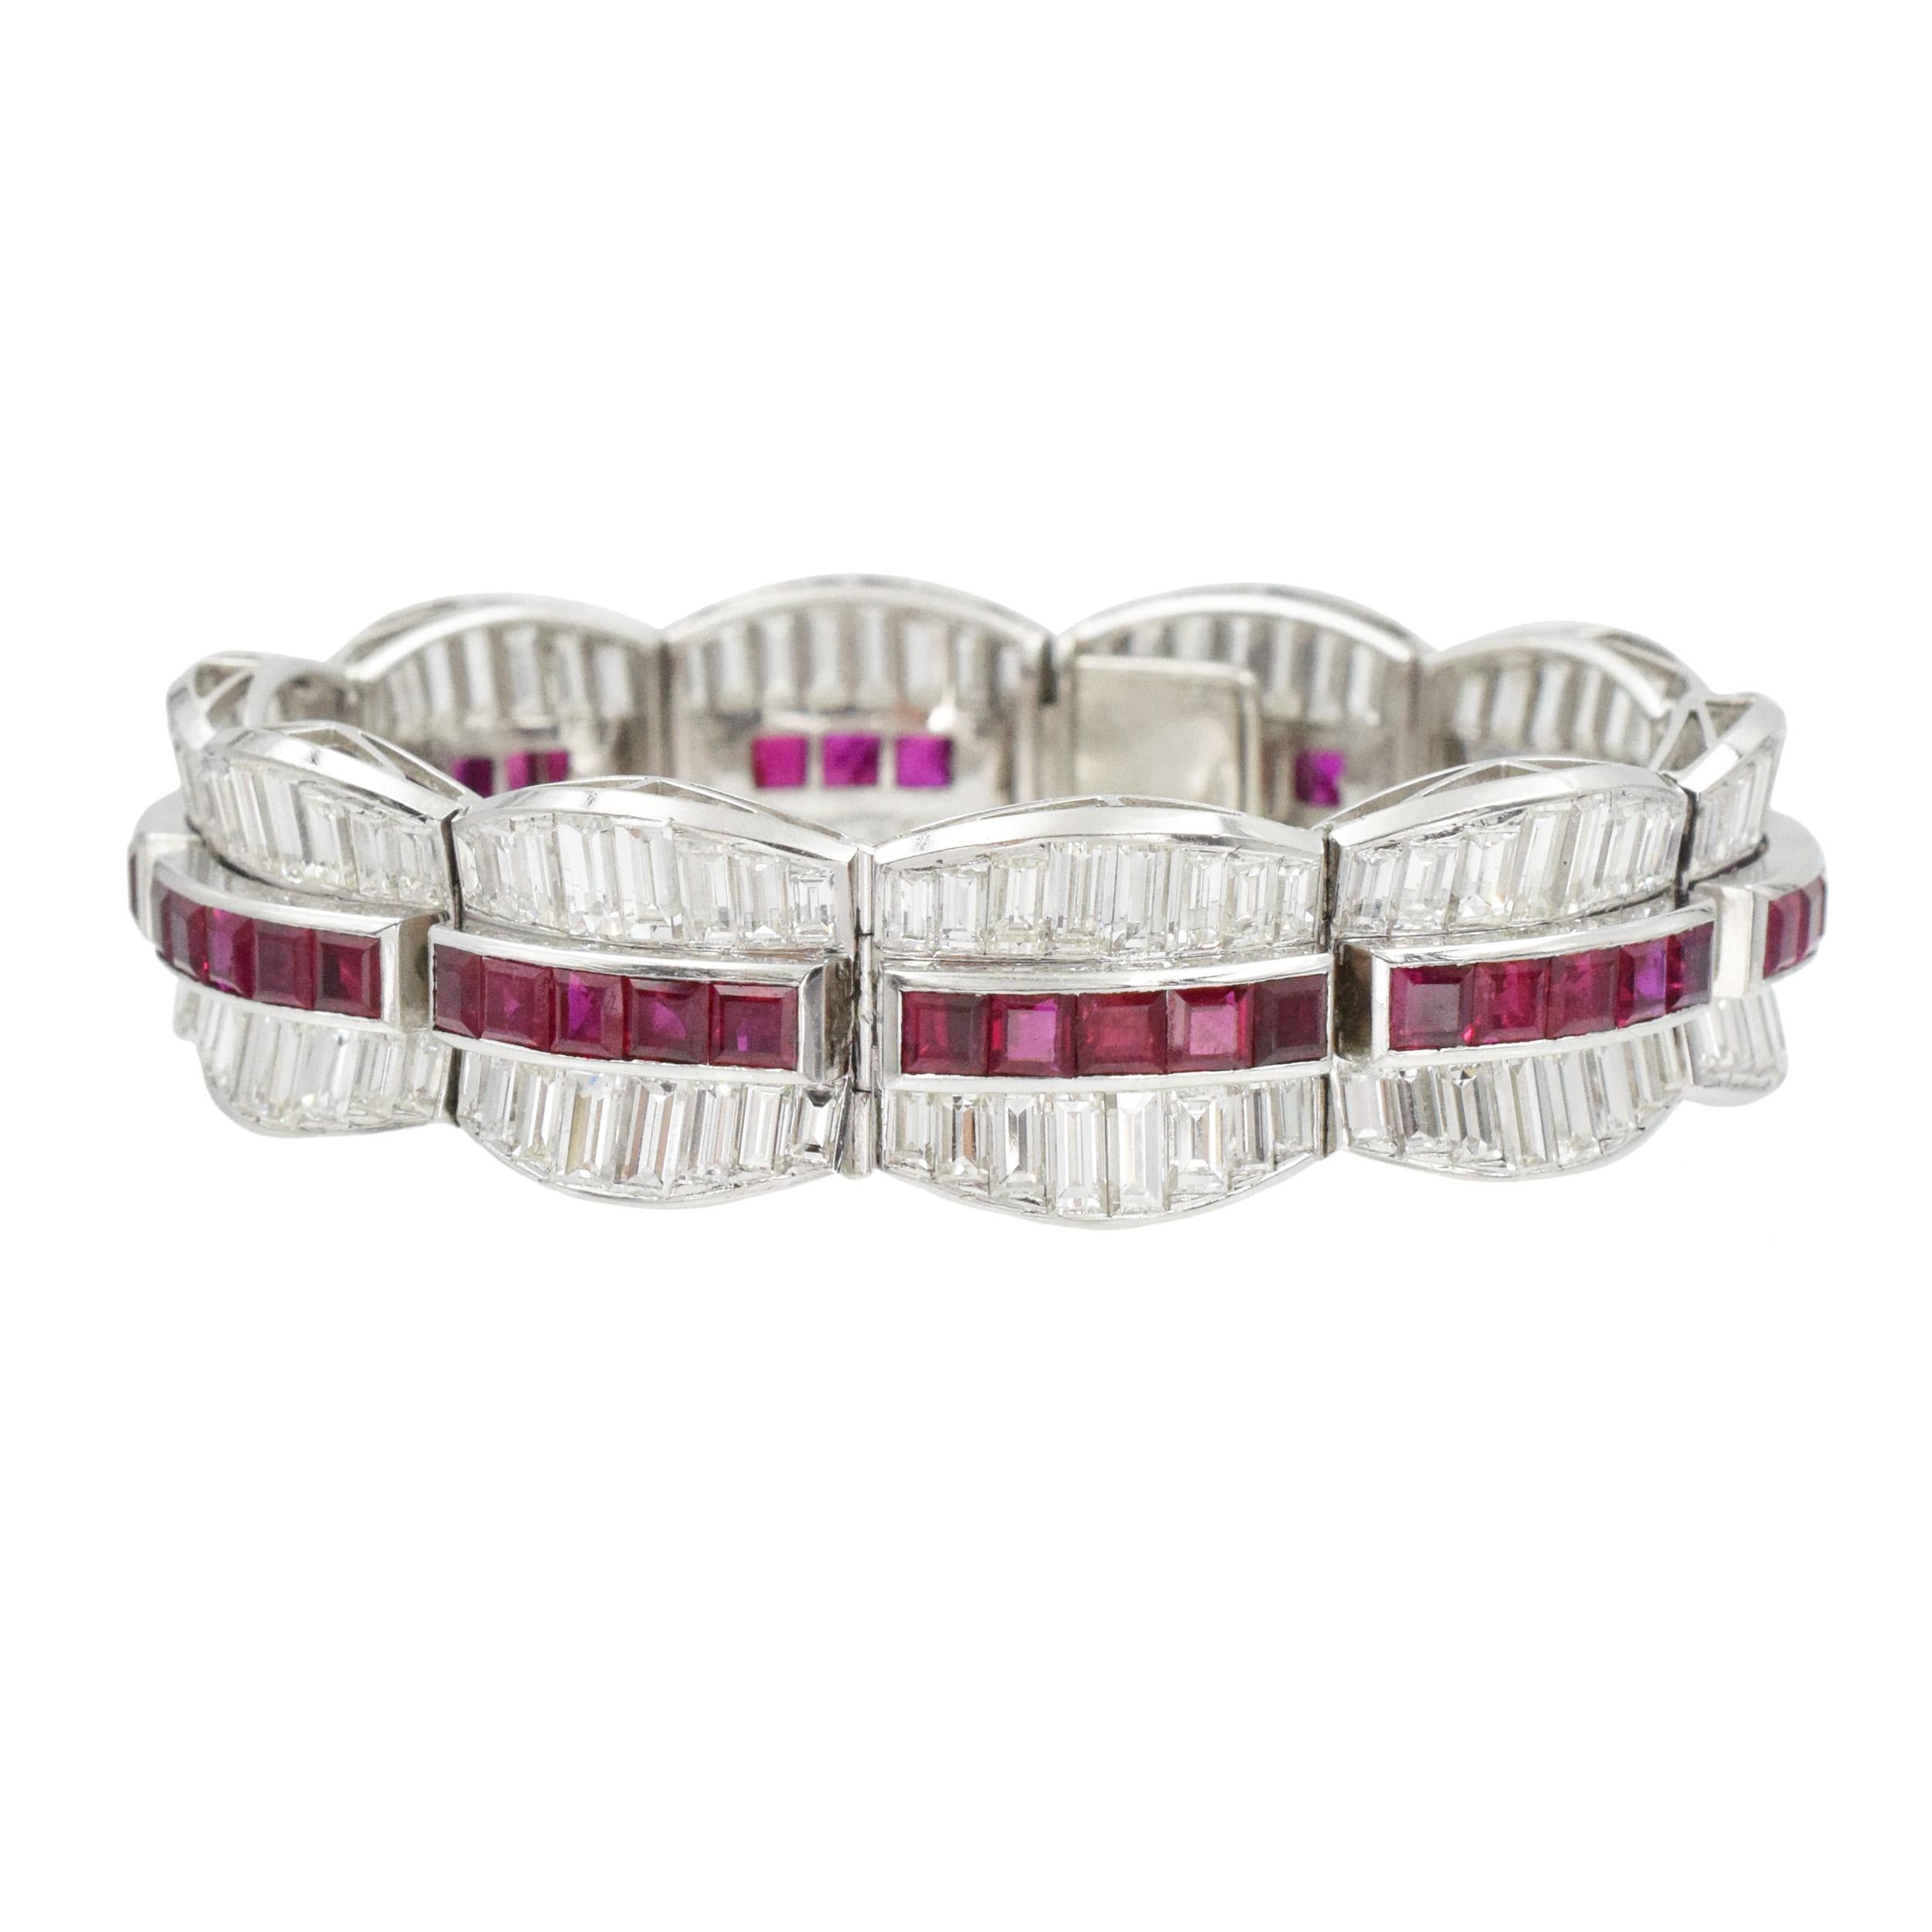 Ruby and Diamond Bracelet bracelet in platinum. 
This bracelet consists of 10 links, featuring channel set square cut rubies in the center, flanked by channel set baguette cut diamonds. There is total of 50 square rubies with total weight of